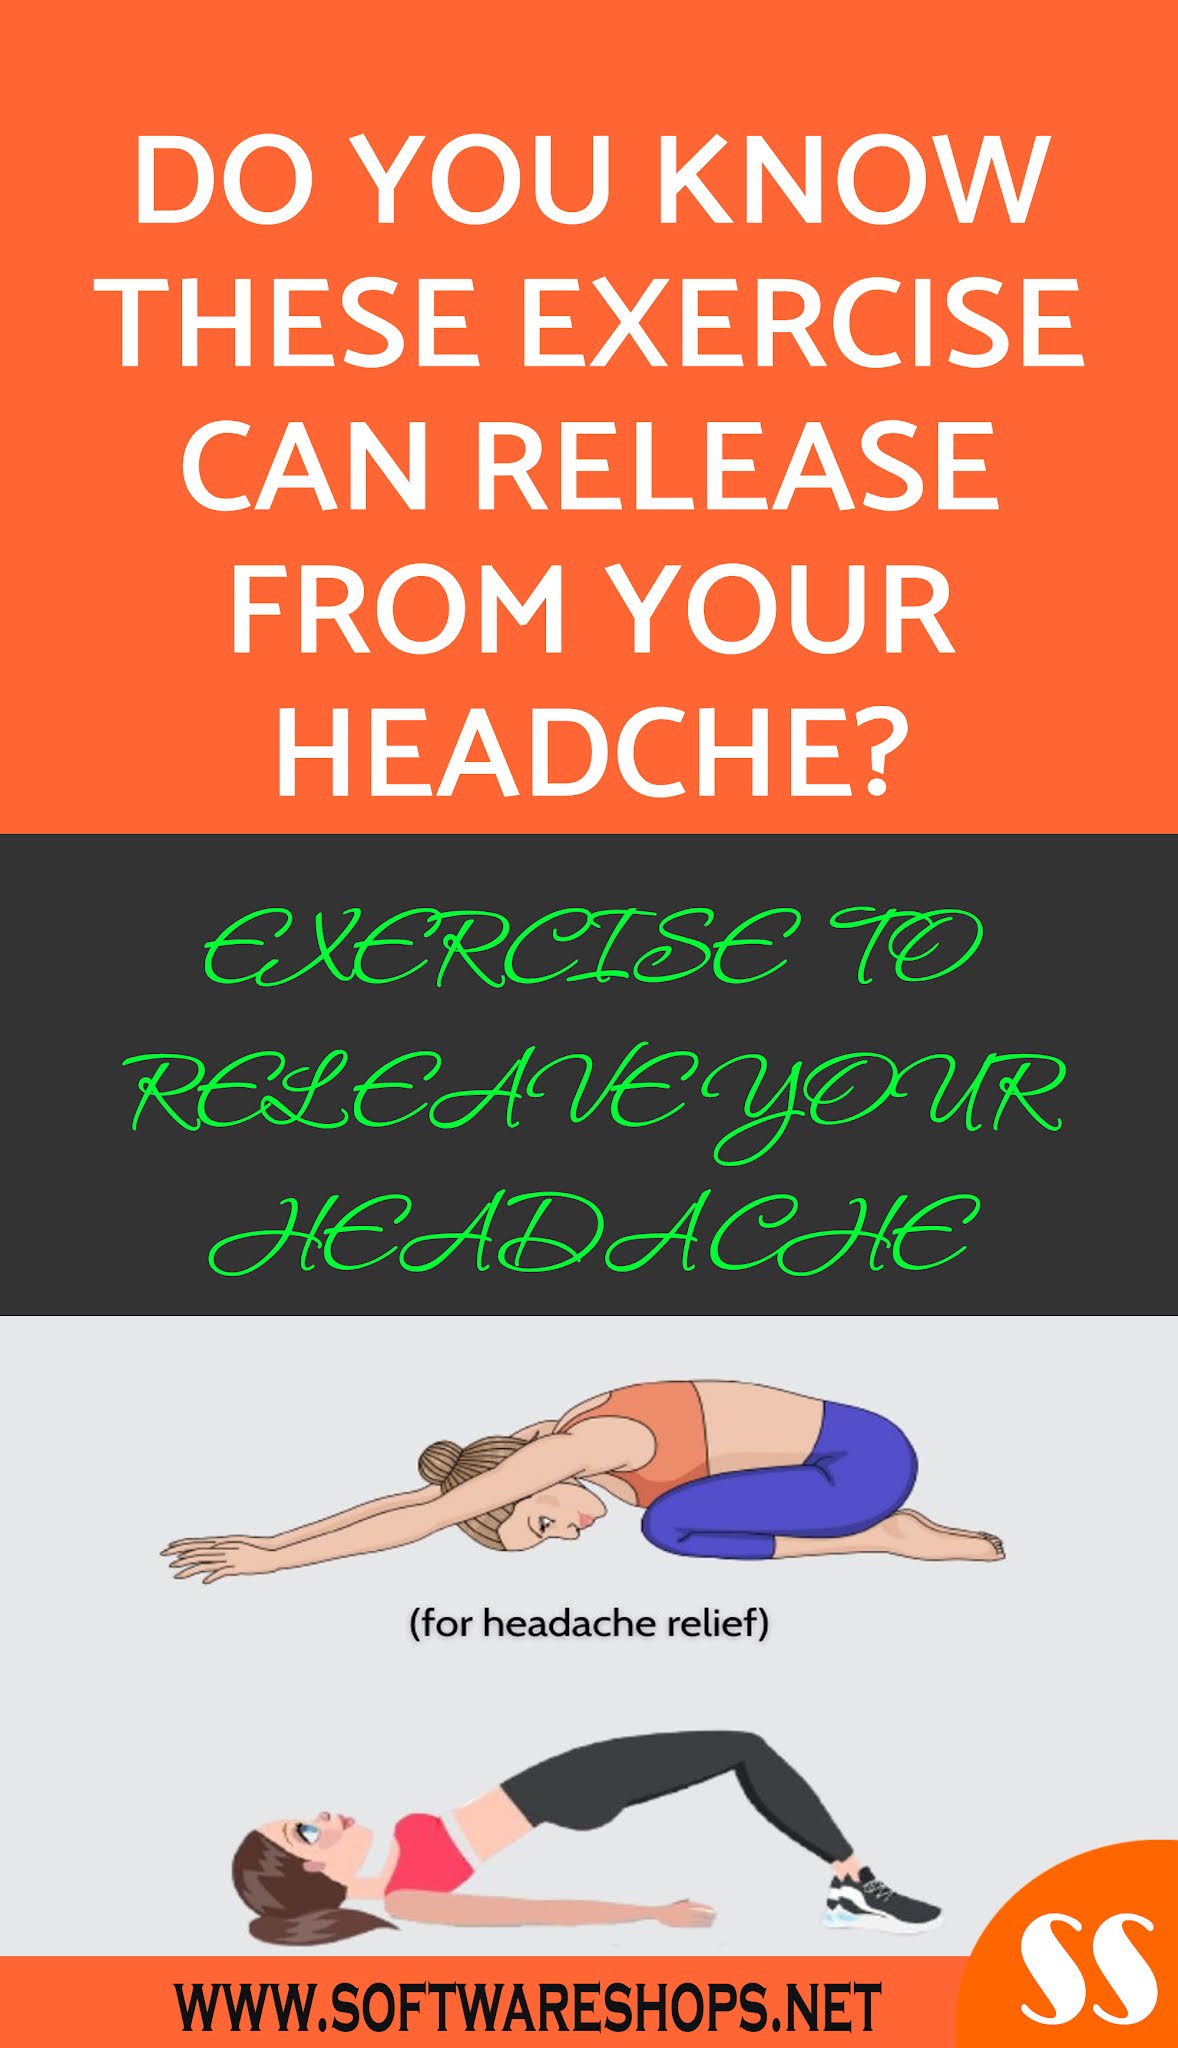 5 Exercises To Relieve Your Headache